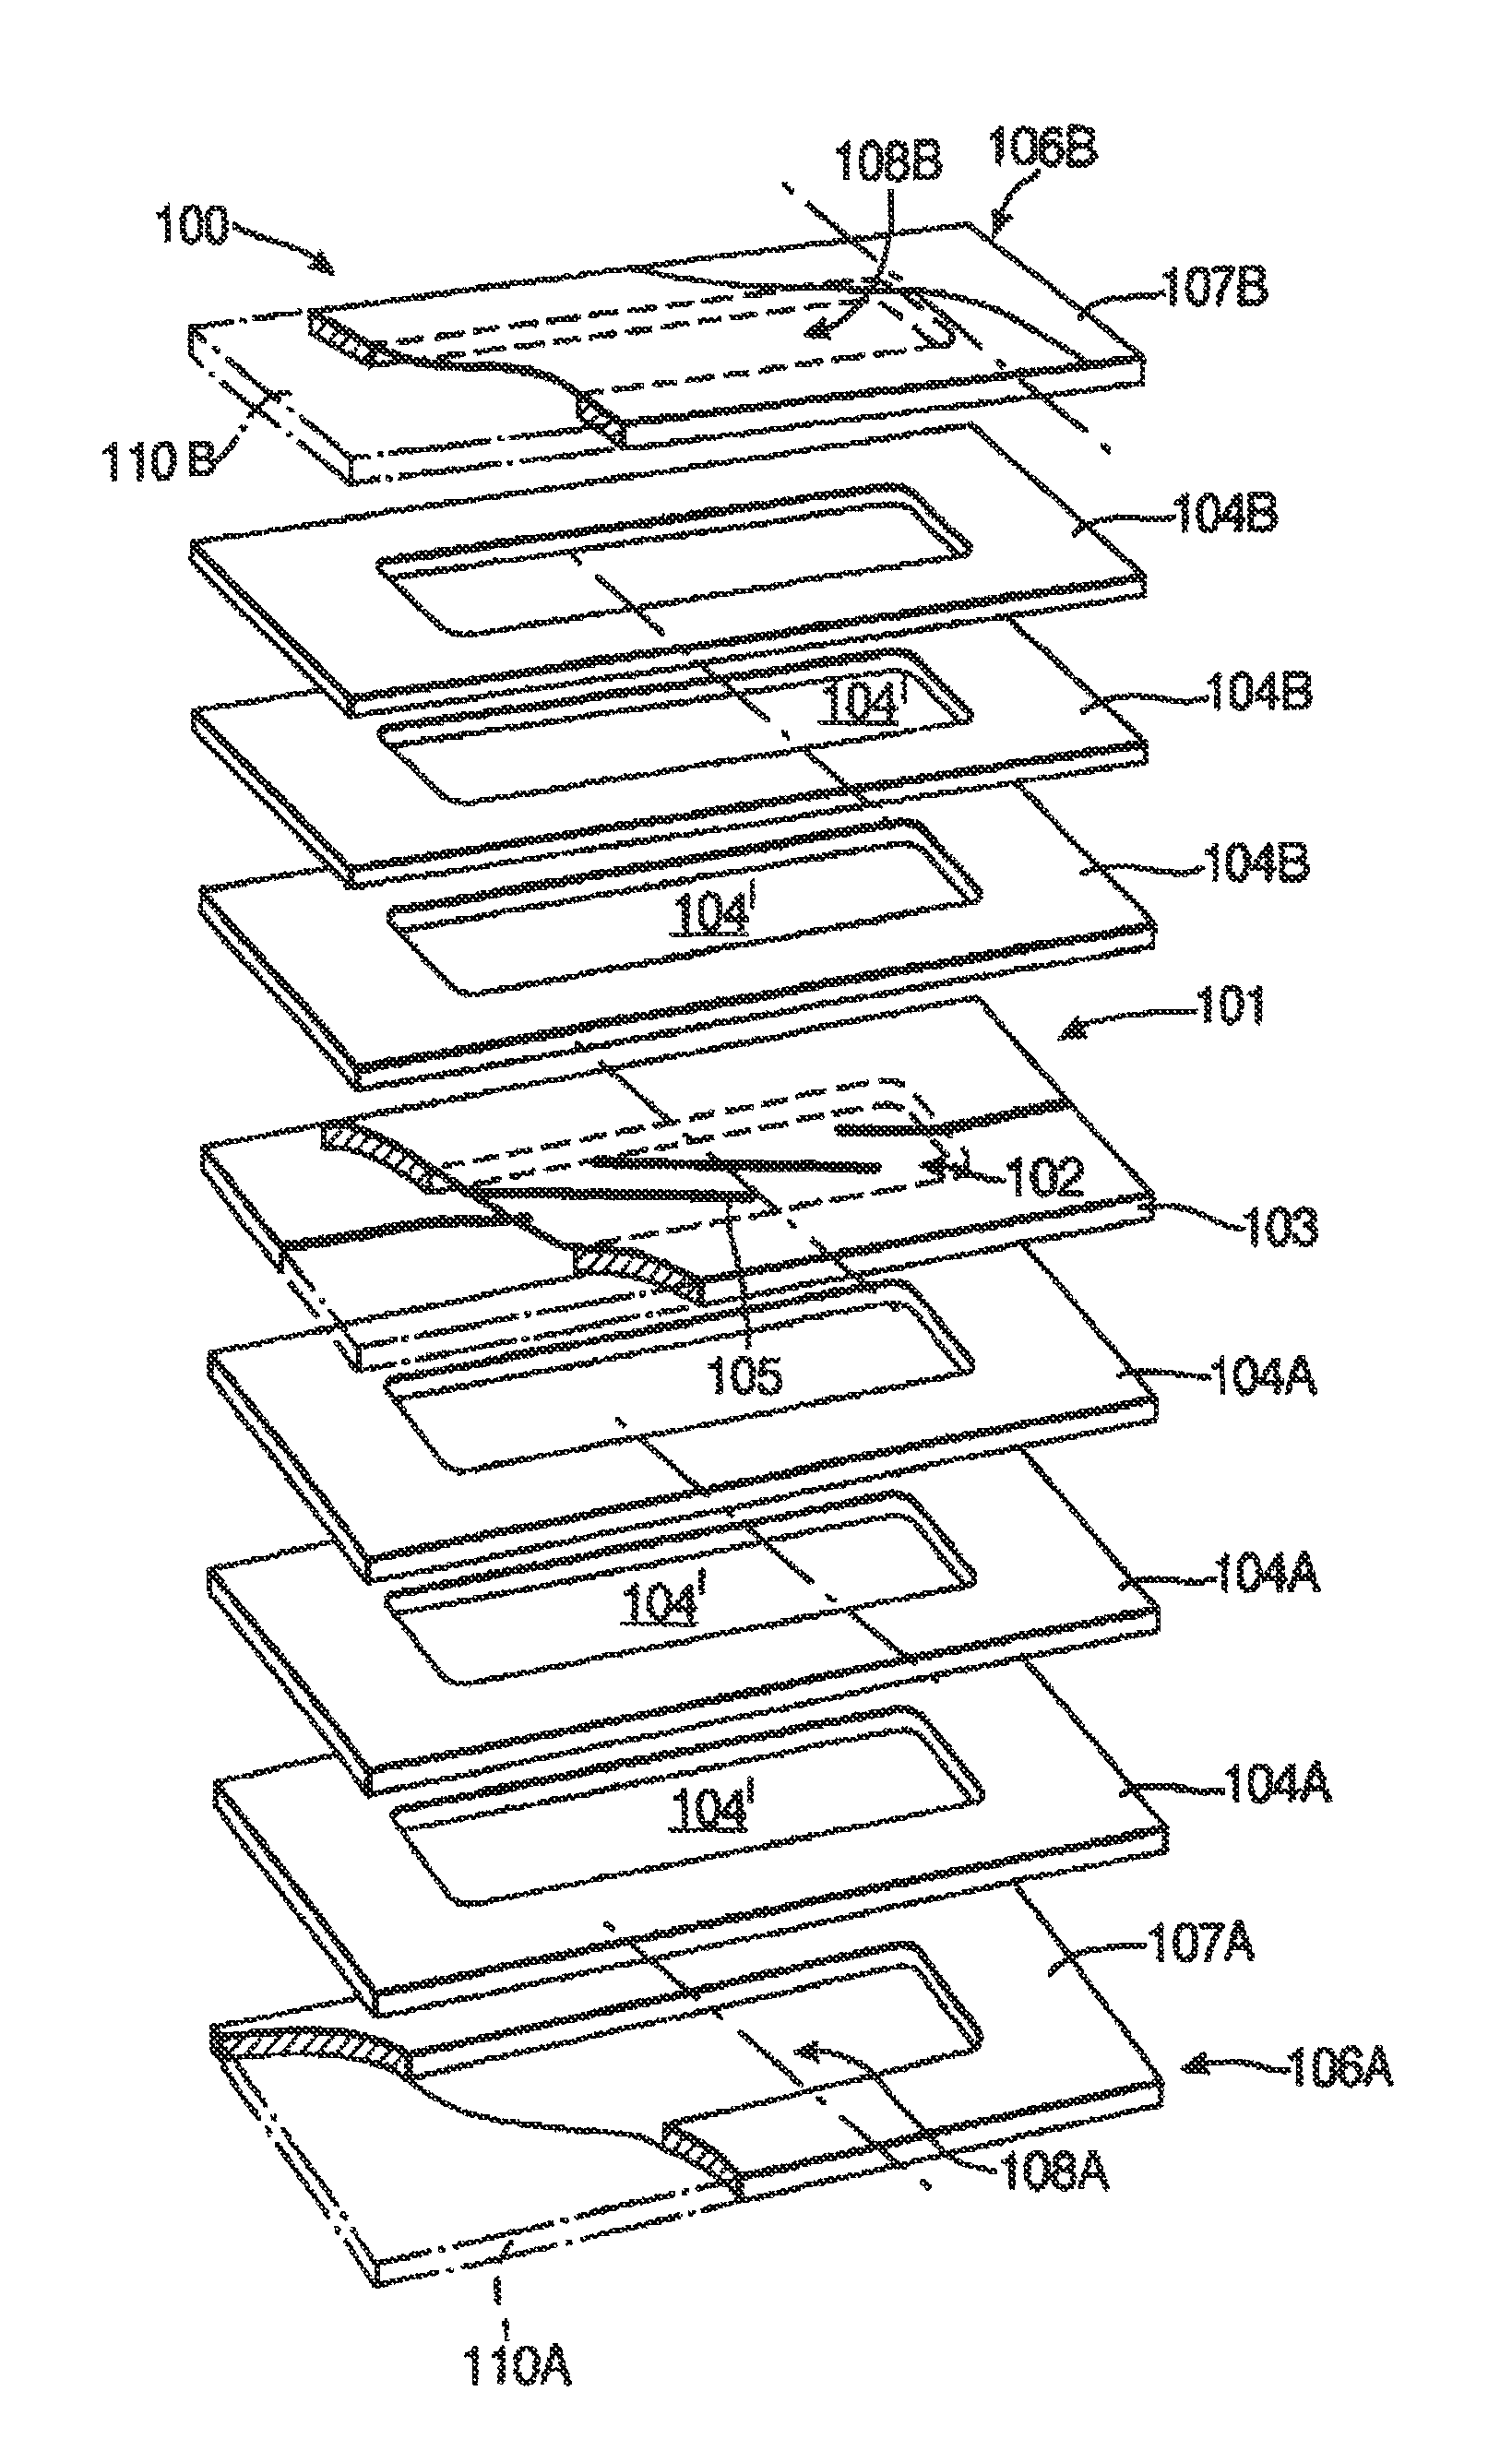 Microwave circuit assembly comprising a microwave component suspended in a gas or vacuum region